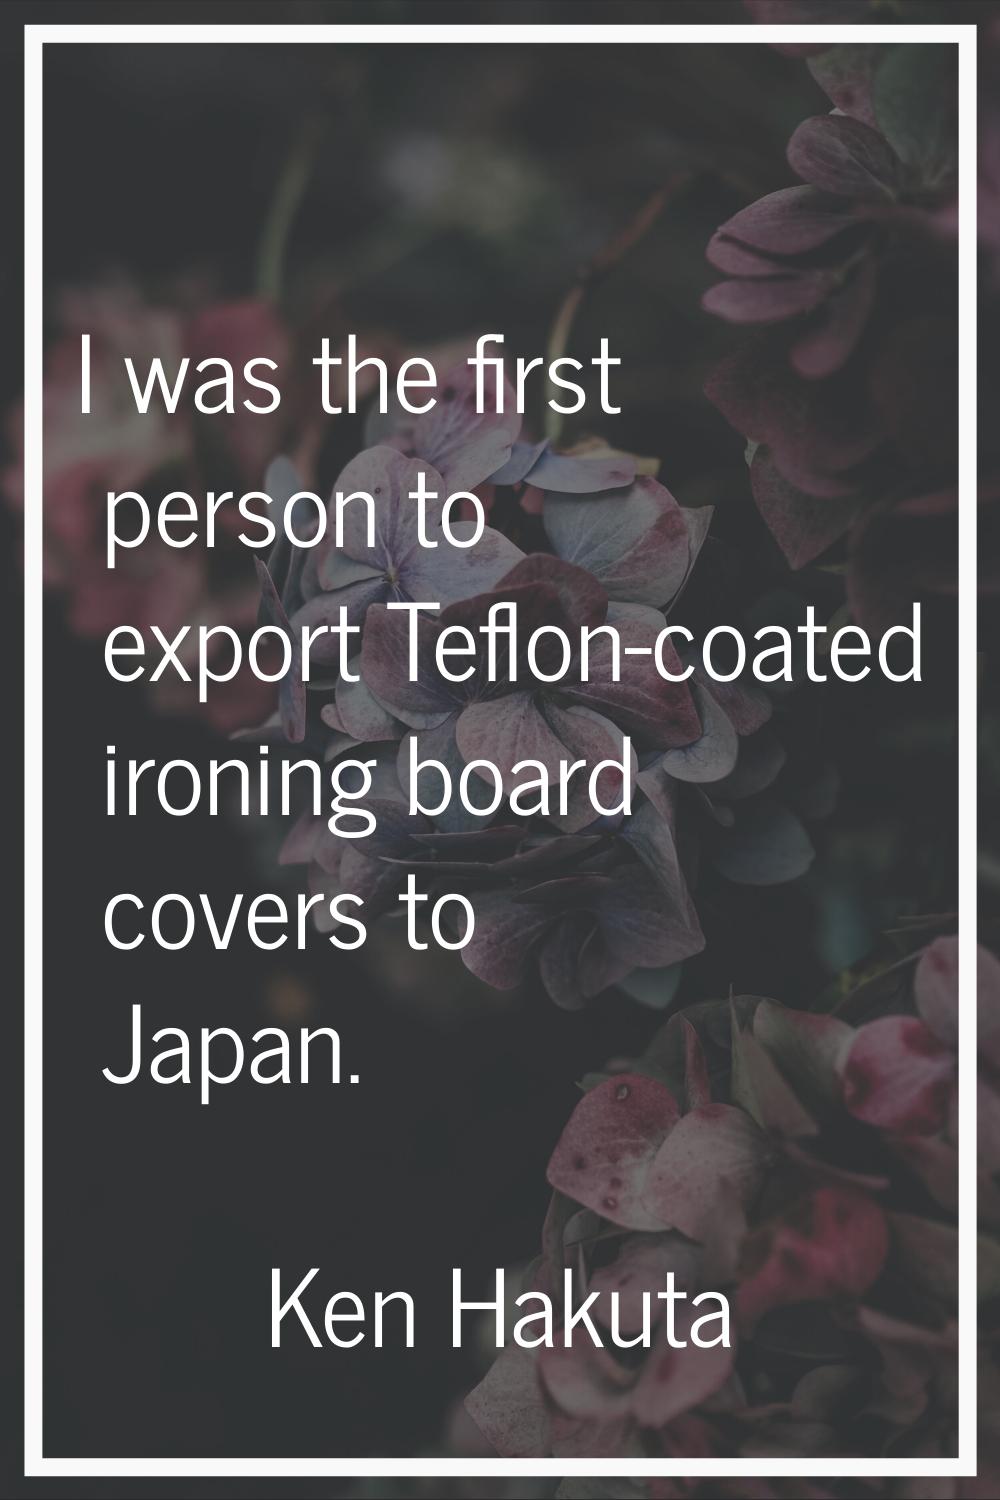 I was the first person to export Teflon-coated ironing board covers to Japan.